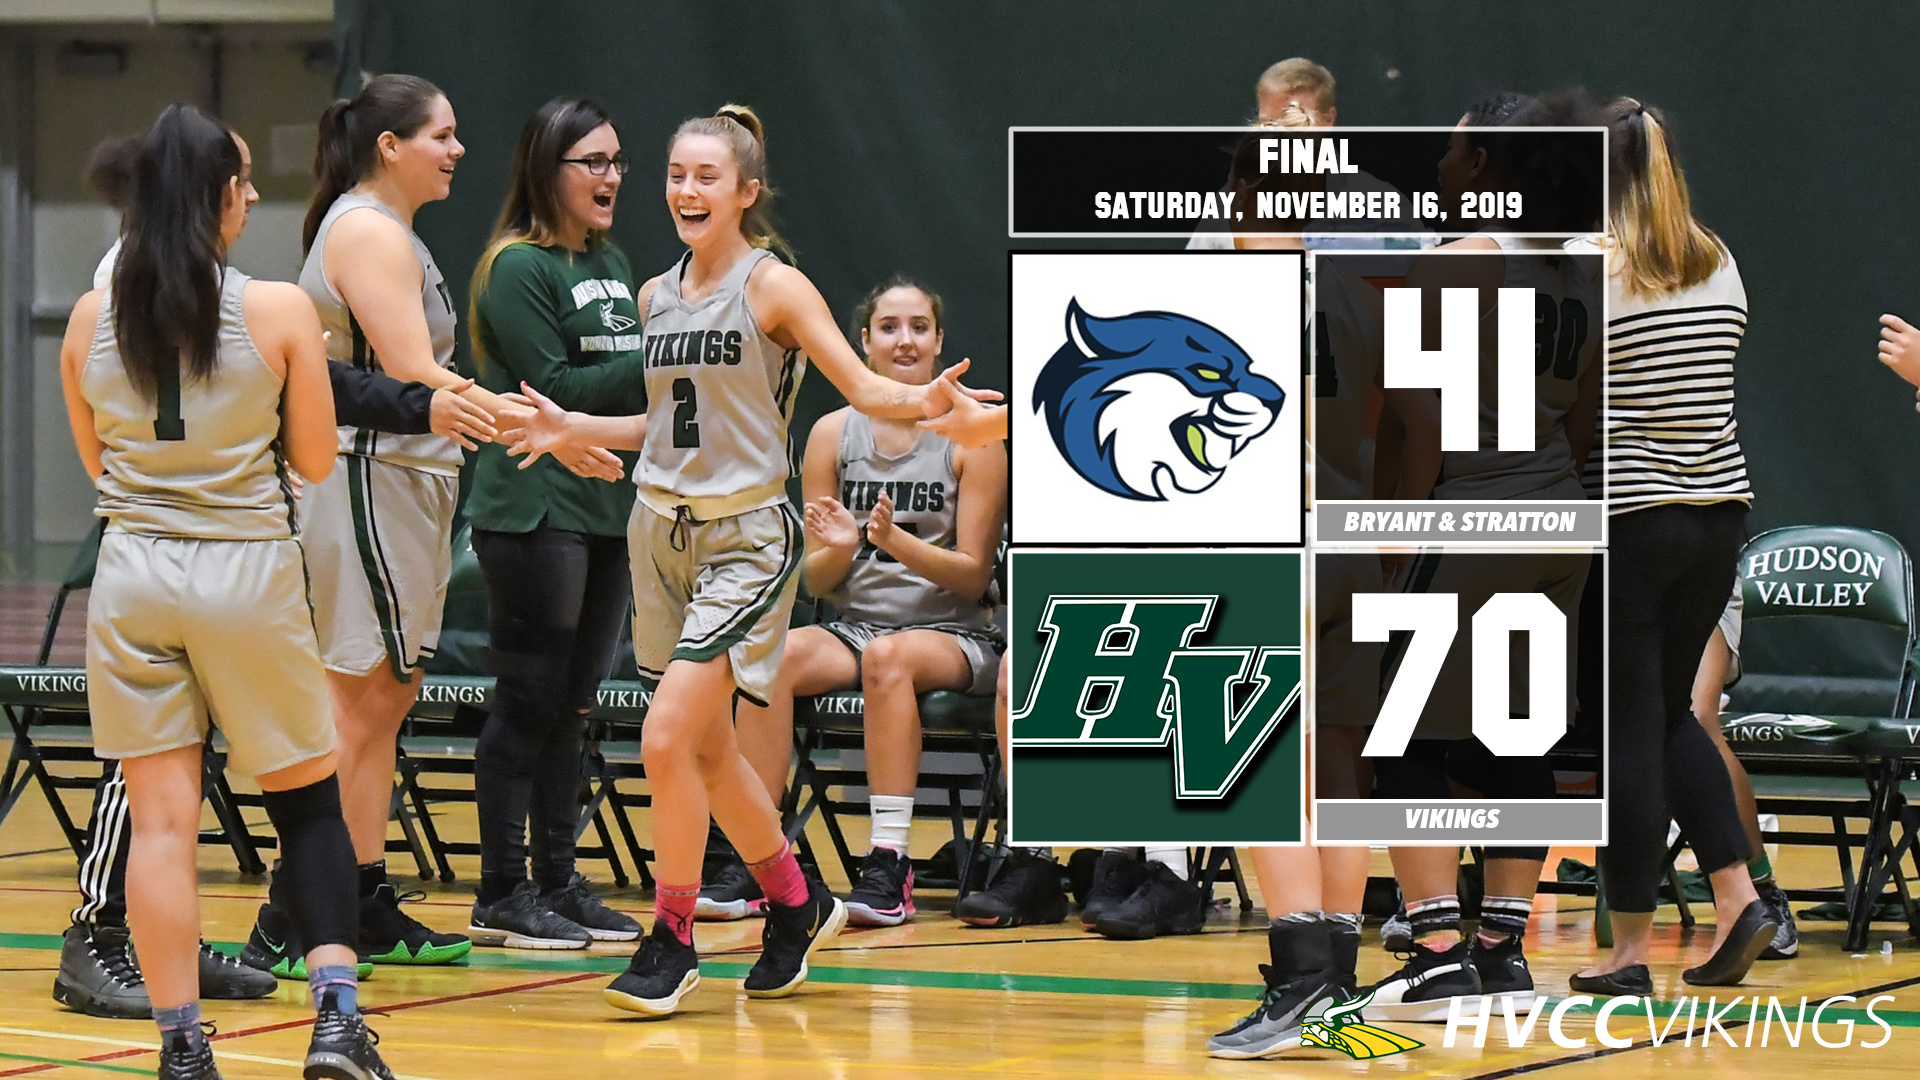 Women's basketball defeated Bryant & Stratton 70 to 41 on November 16, 2019